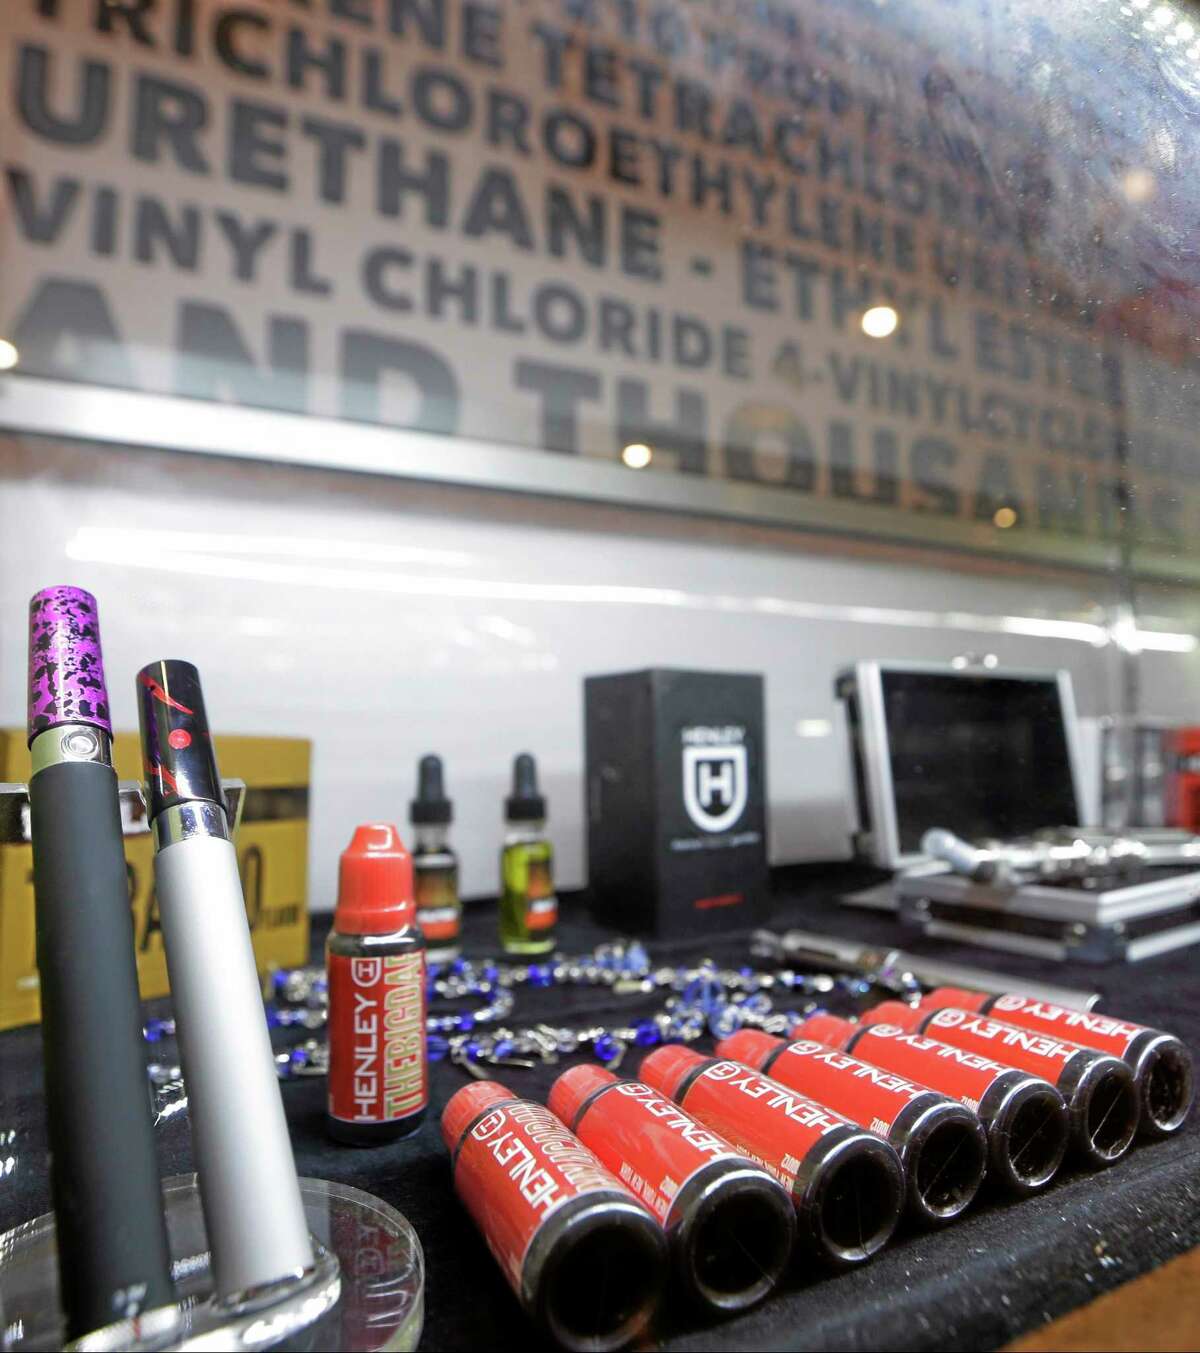 In this Feb. 20, 2014 photo, e-cigarettes and liquid nicotine solutions are displayed at the Henley Vaporium in the Soho neighborhood of New York. E-cigarettes are usually made of metal parts combined with plastic or glass and come in a variety of shapes and sizes. They heat the liquid nicotine solution, creating vapor that quickly dissipates when exhaled. (AP Photo/Frank Franklin II)